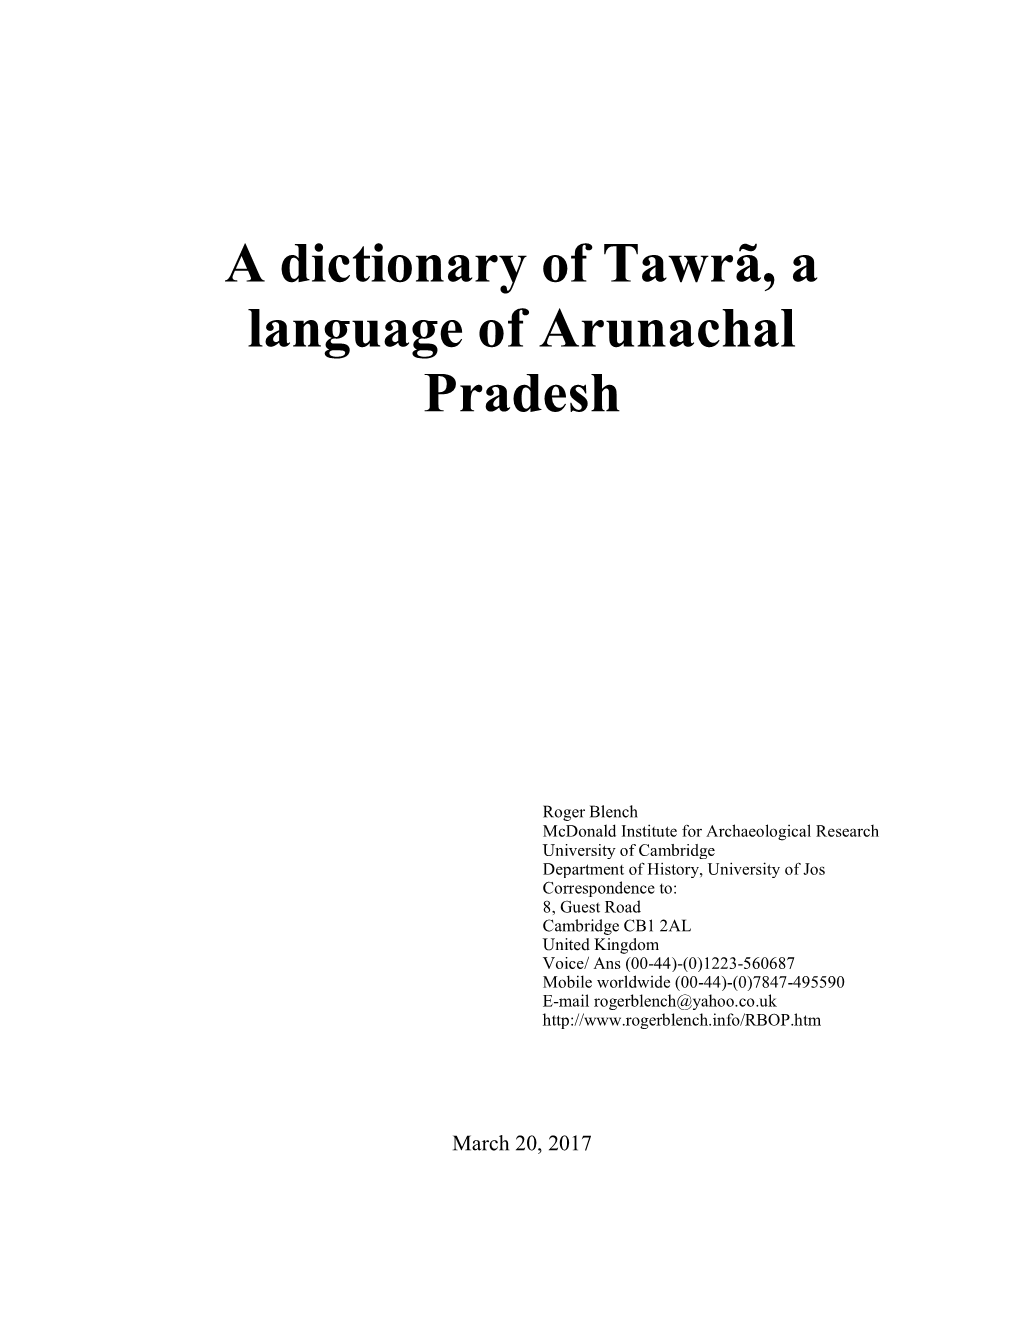 Tawrã Dictionary Orthographic Edition TABLE of CONTENTS